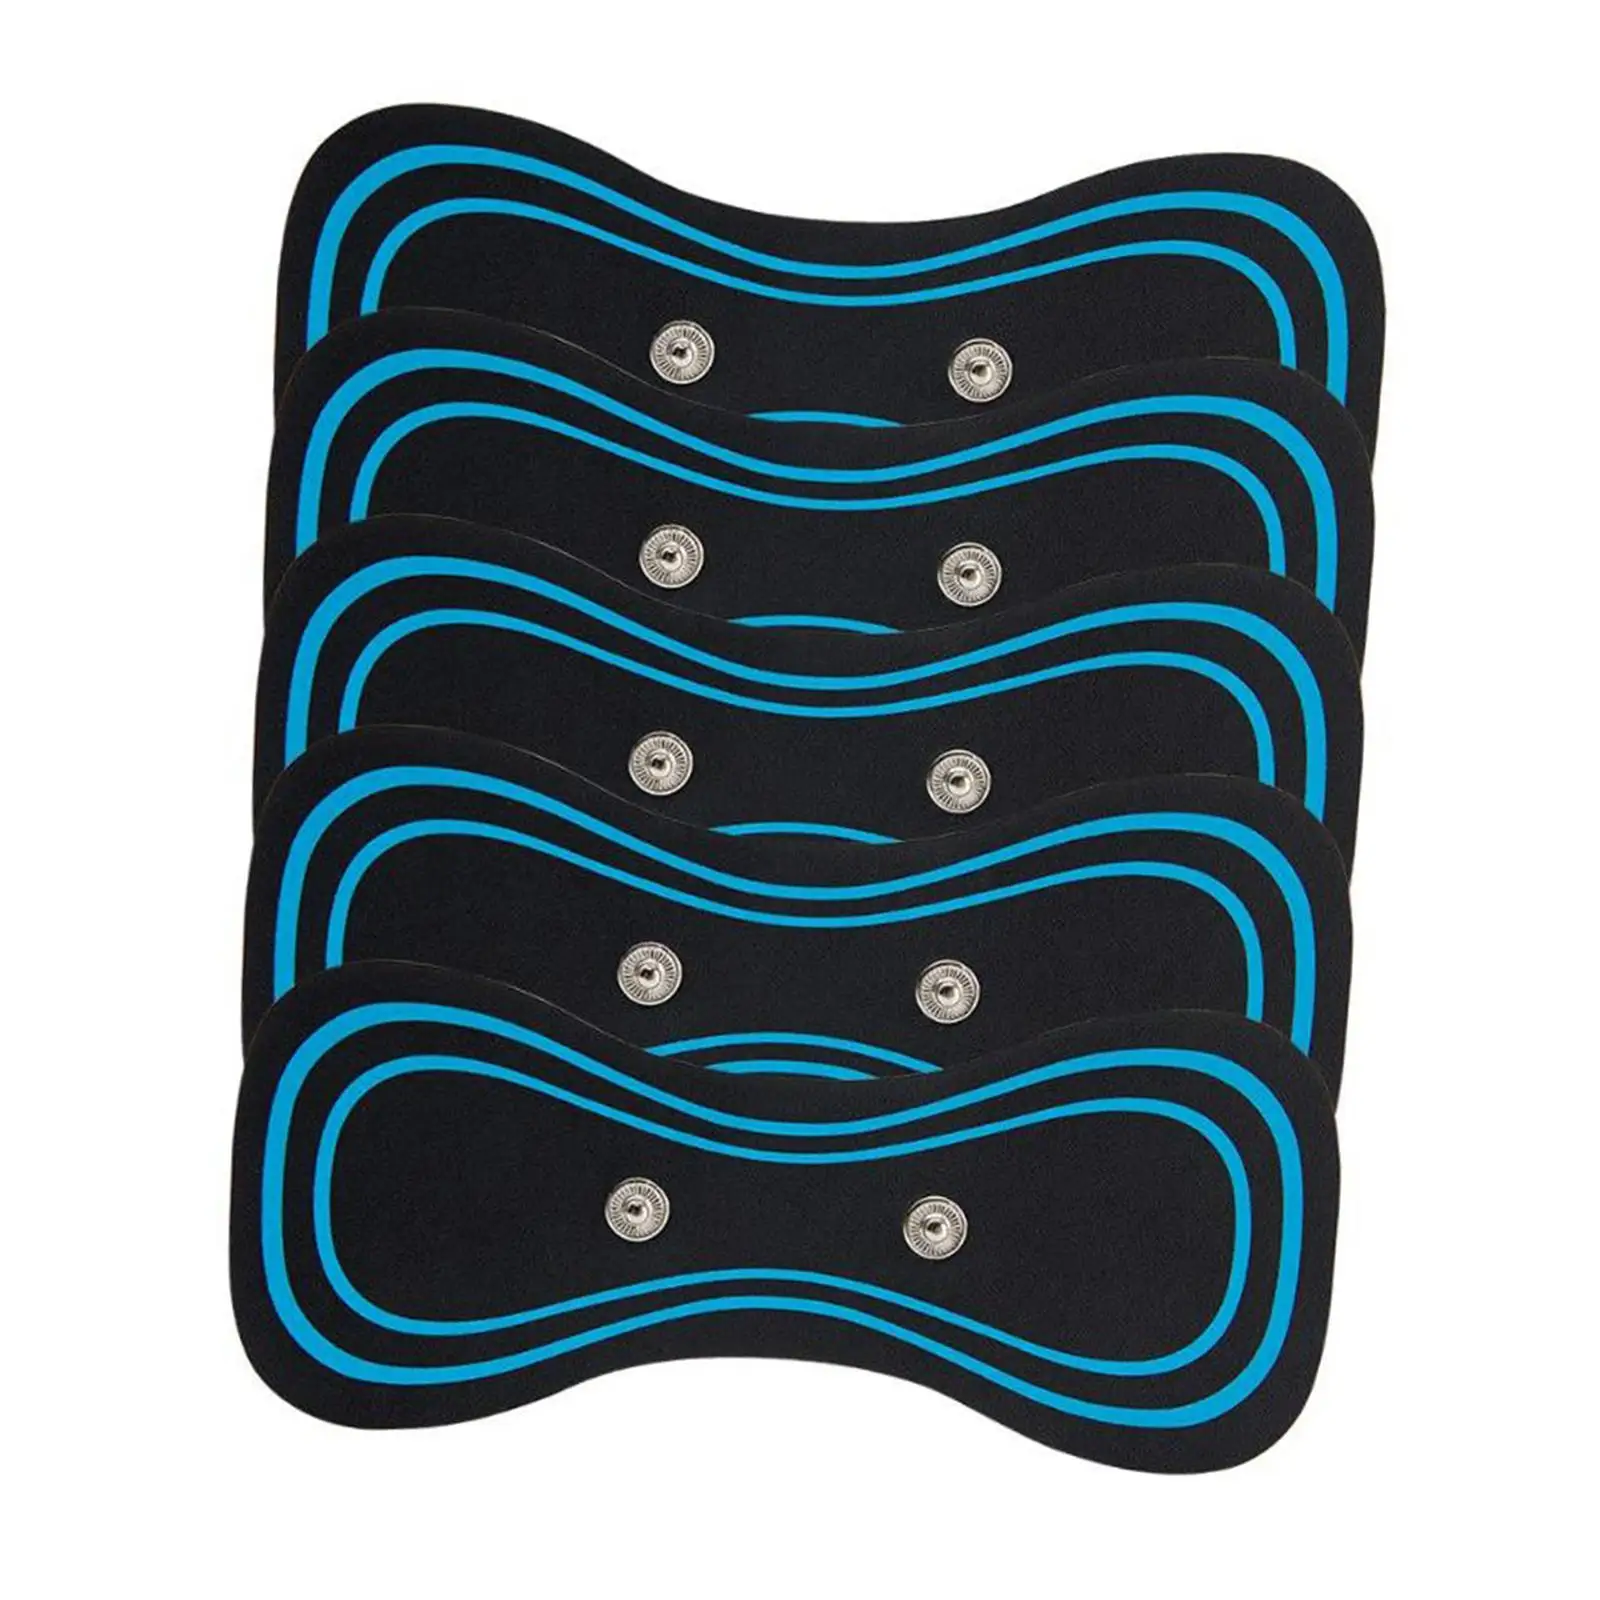 

5x Cervical Spine Massager Replacement Pads Mini Portable Reusable Whole Body Massager Pad for Neck Shoulder Back Waist Arms